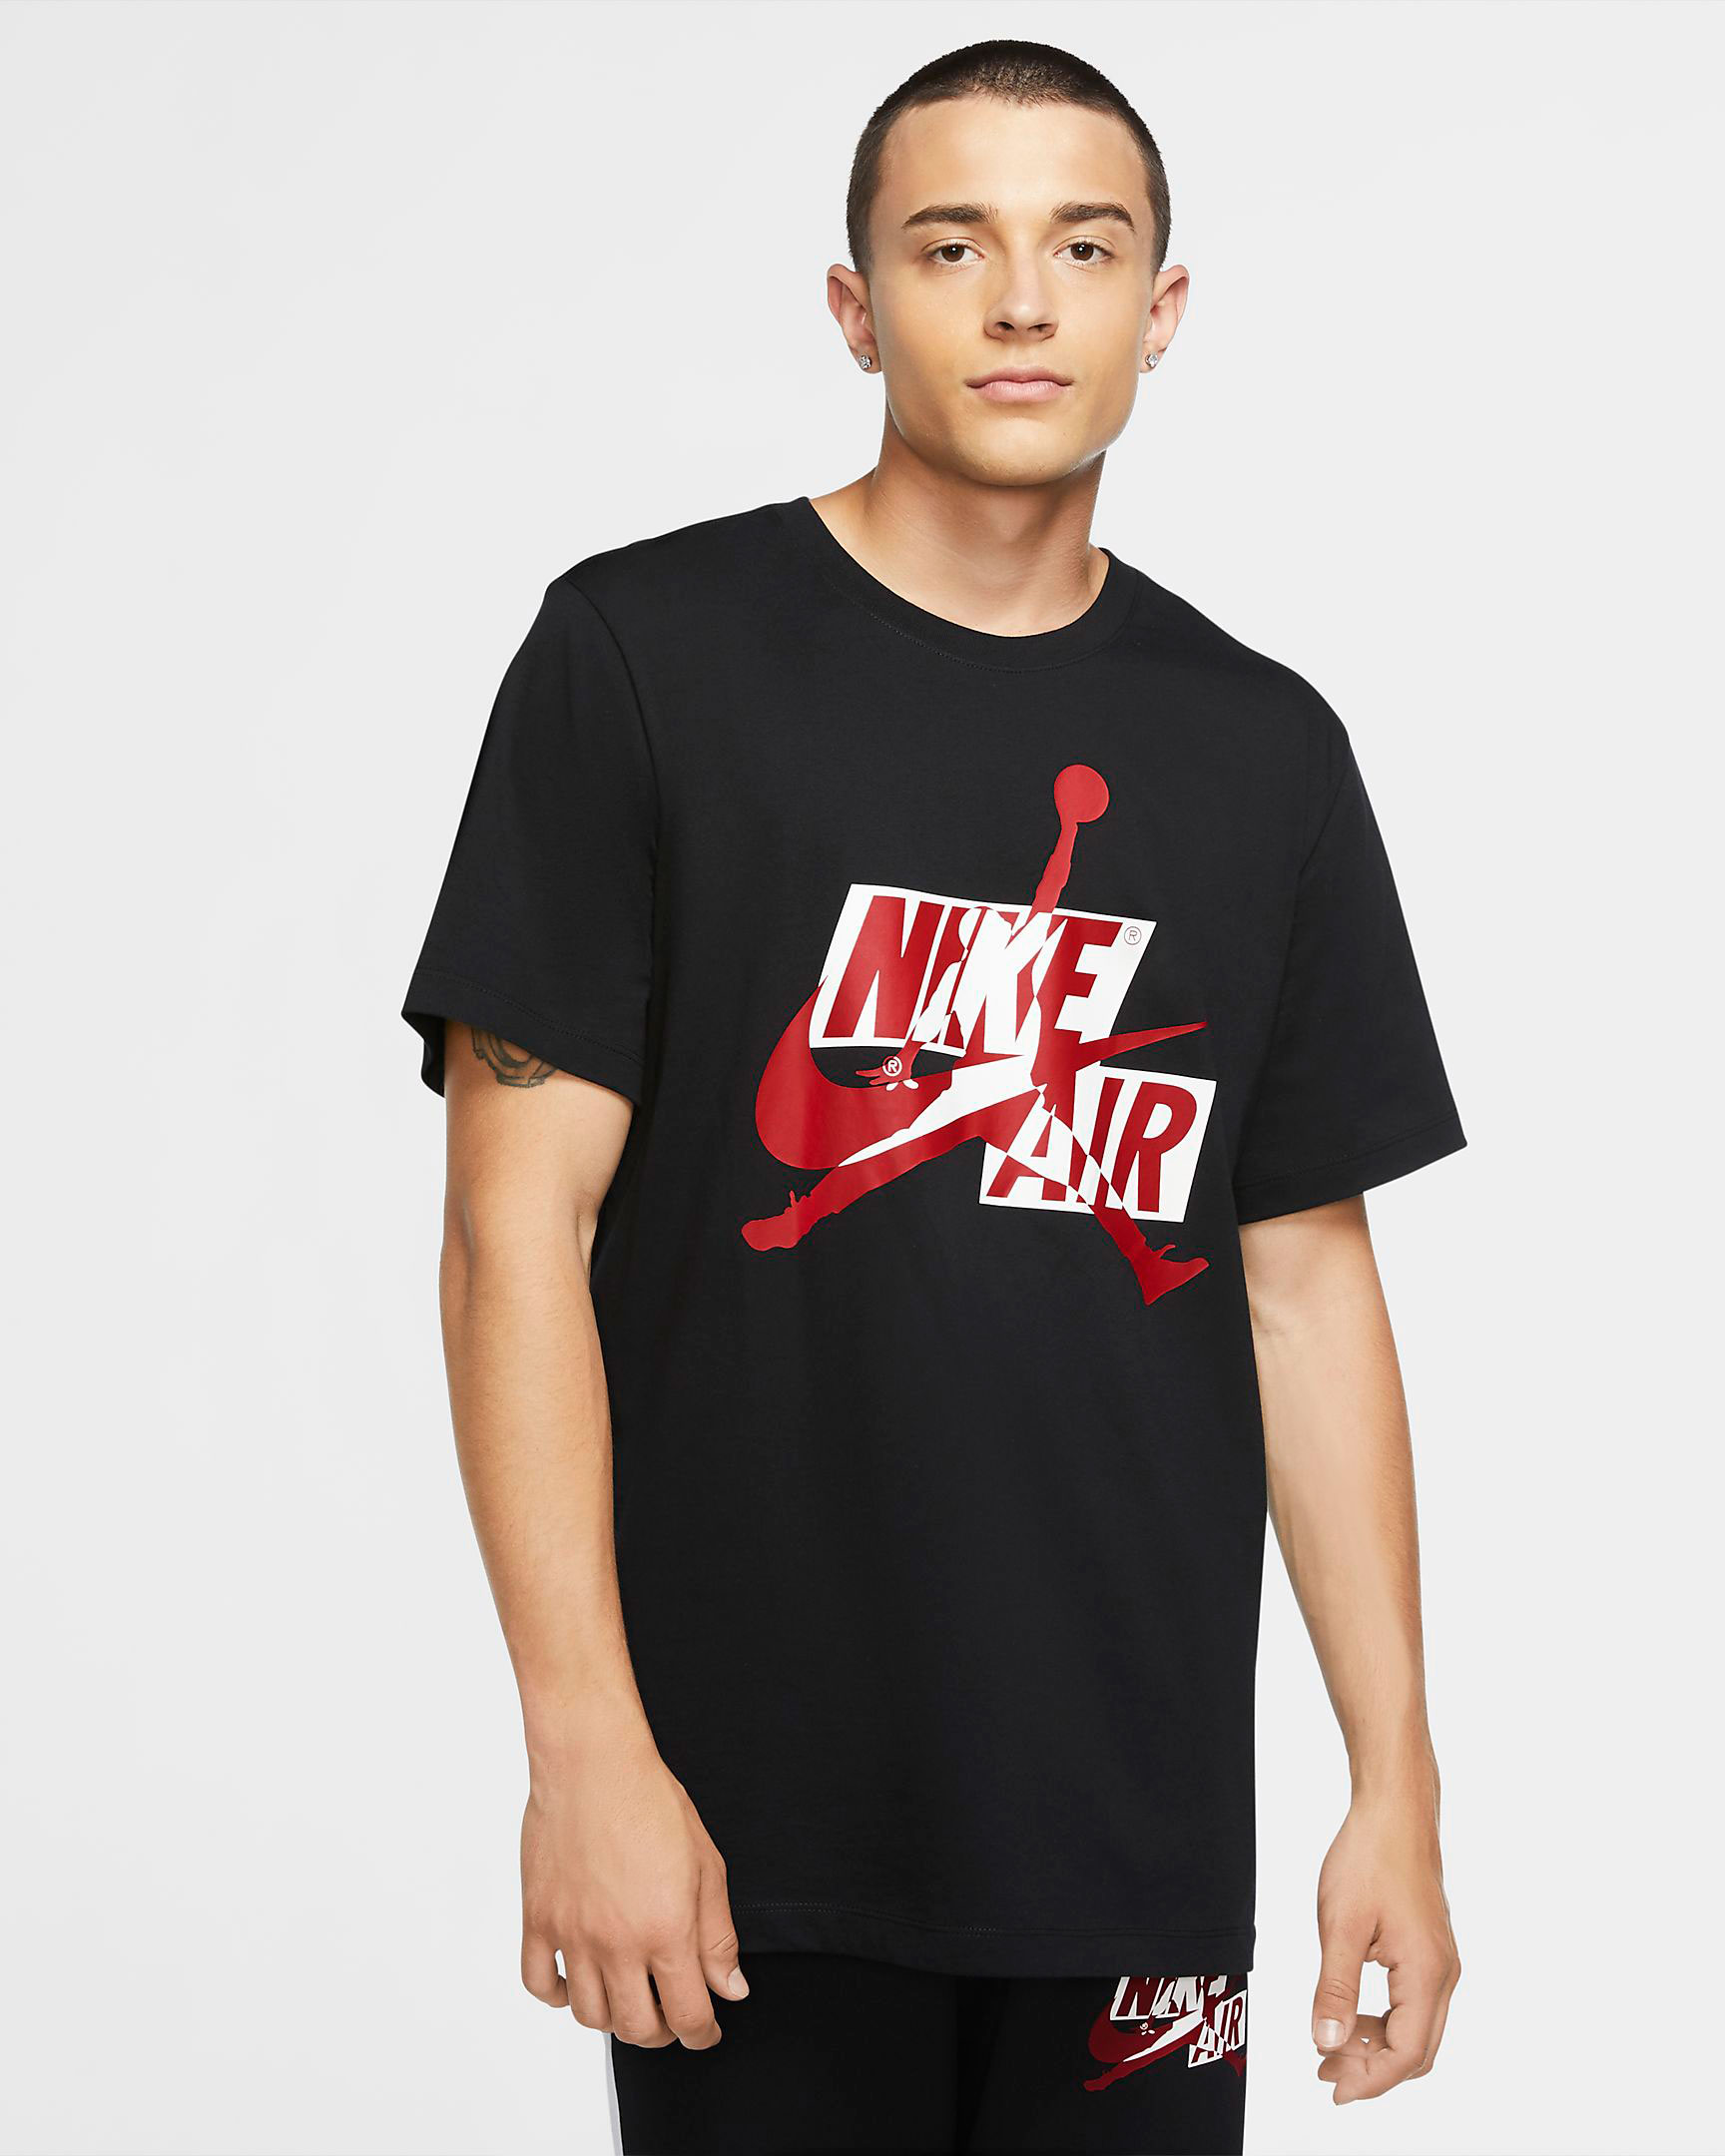 Air Jordan 1 Mid Banned Shirts Hat Outfits | SneakerFits.com